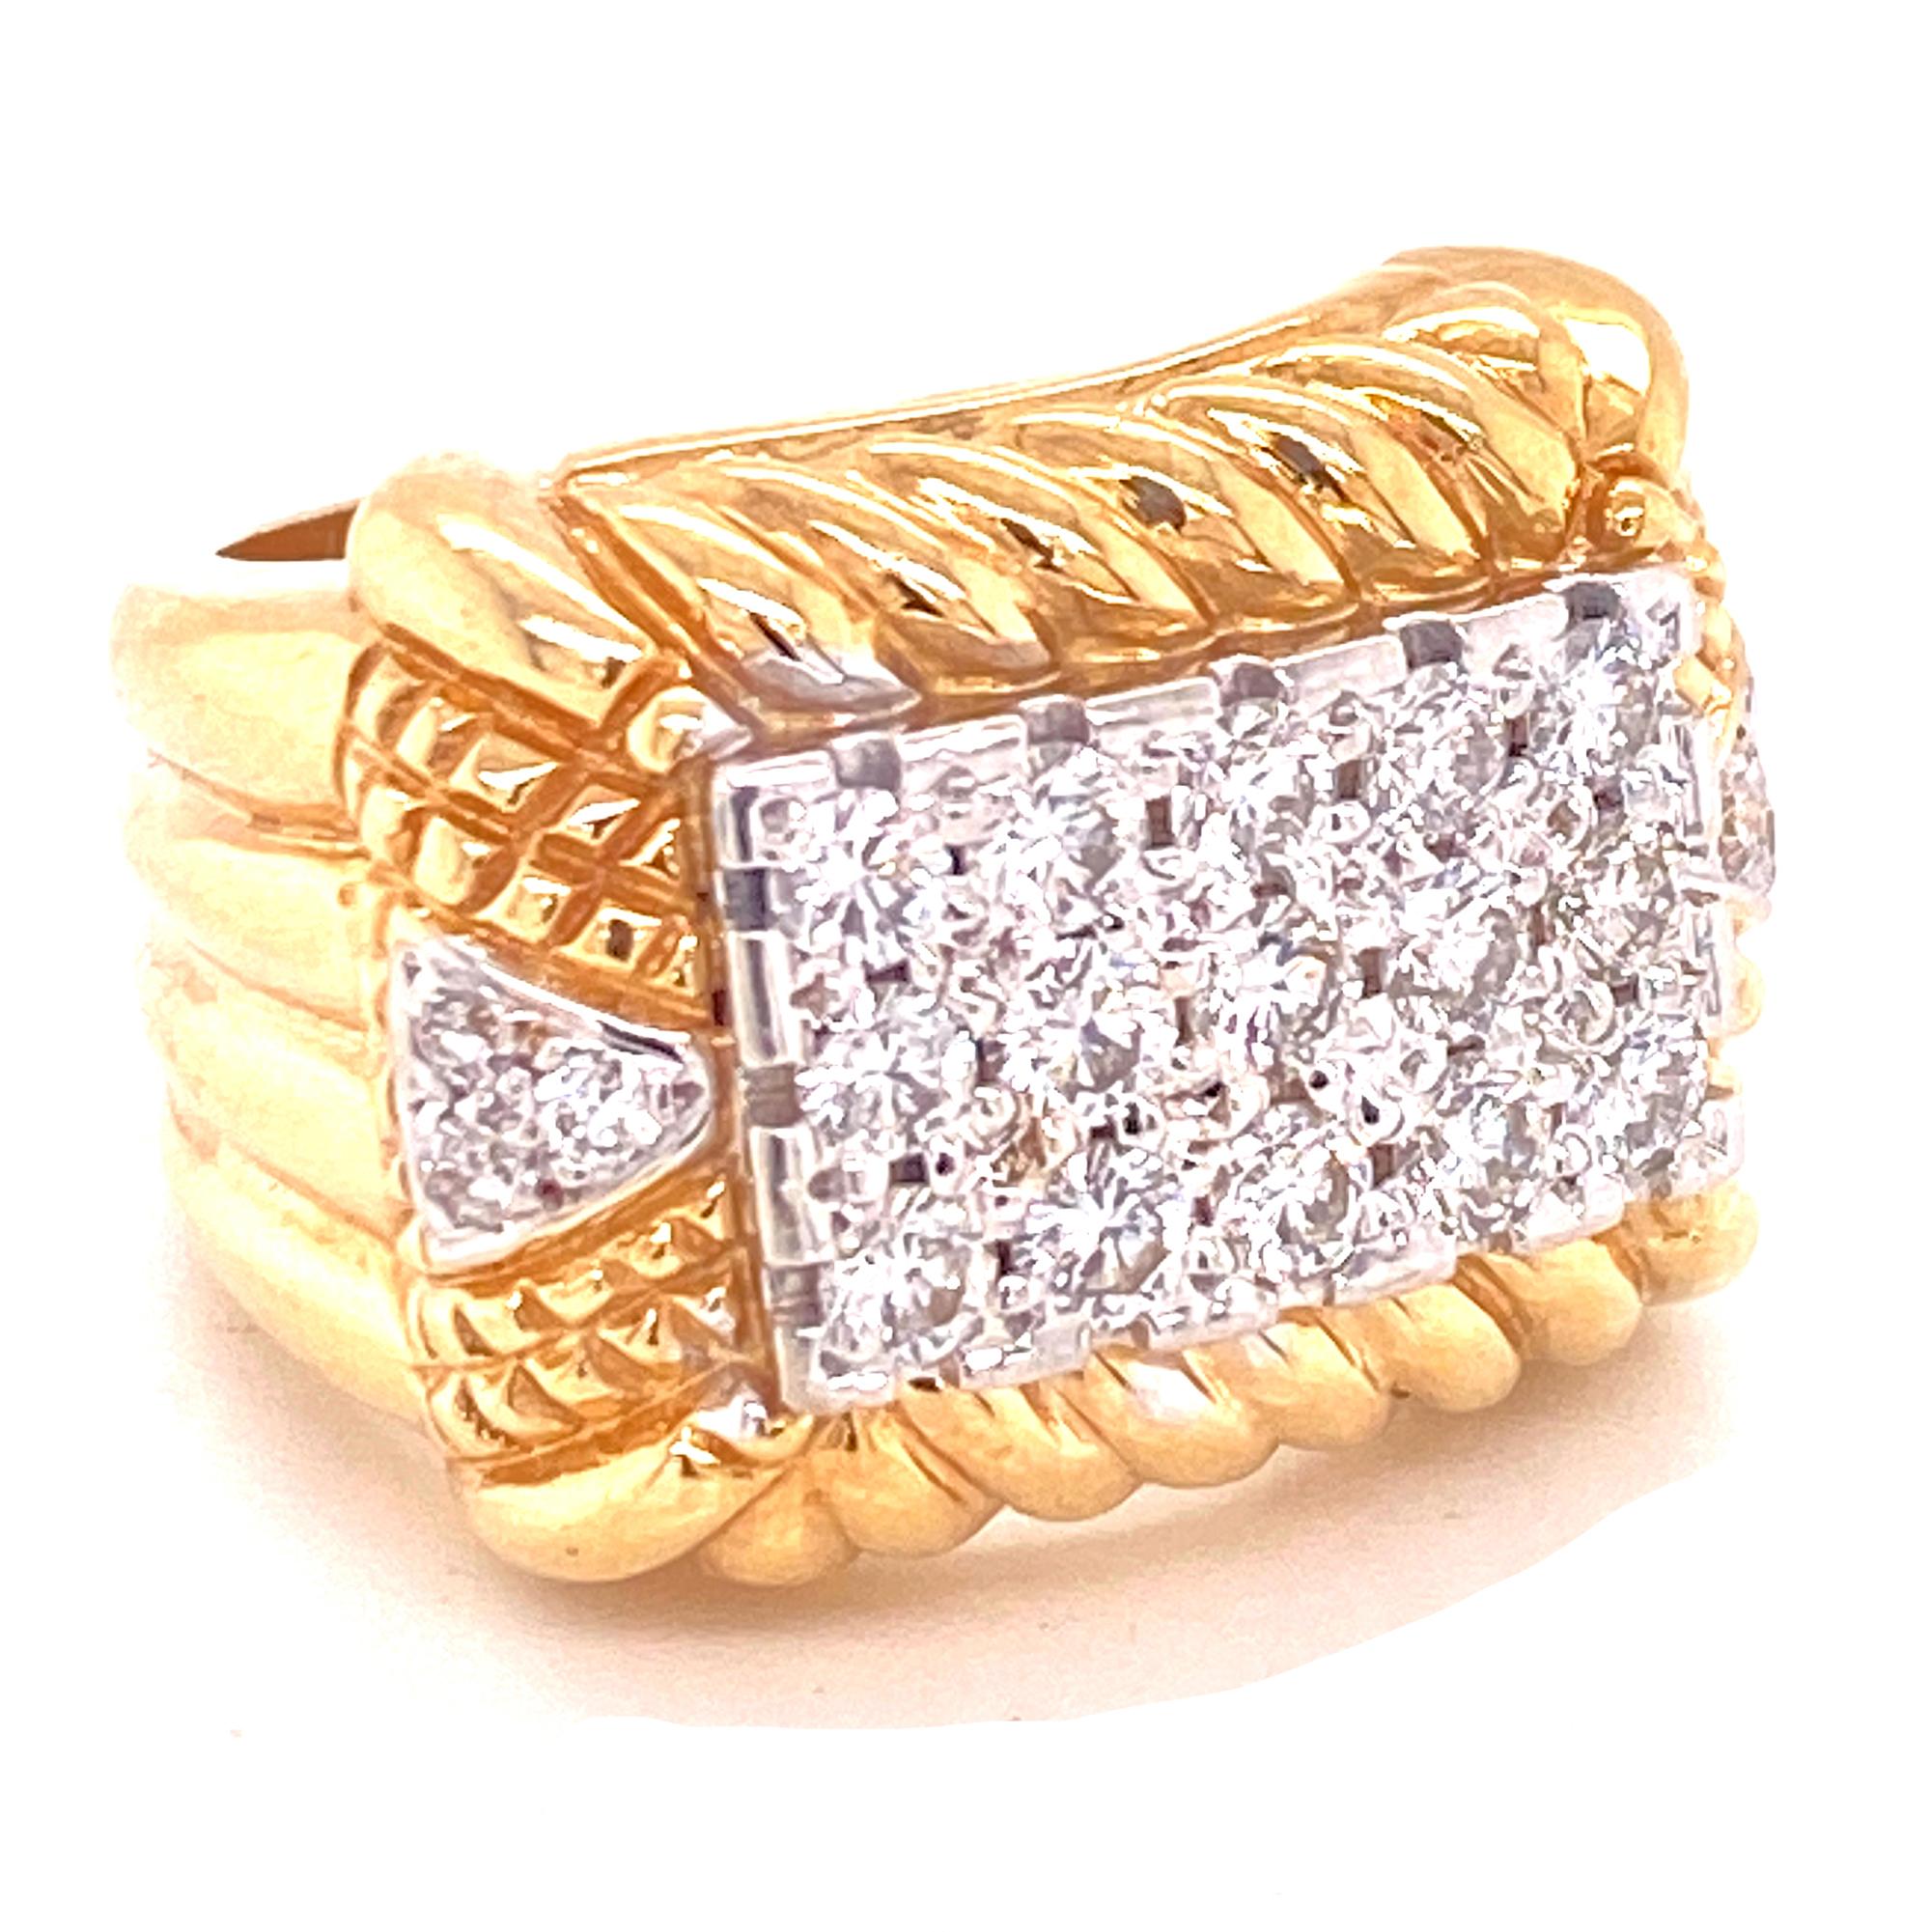 Modern diamond cable ring fashioned in 14 karat yellow gold. The cable textured ring features 21 round brilliant cut diamonds (1.15 CTW) graded F-H color and VS2-SI1 clarity. The ring measures 16mm in width, and is currently size 6 (can be sized ). 